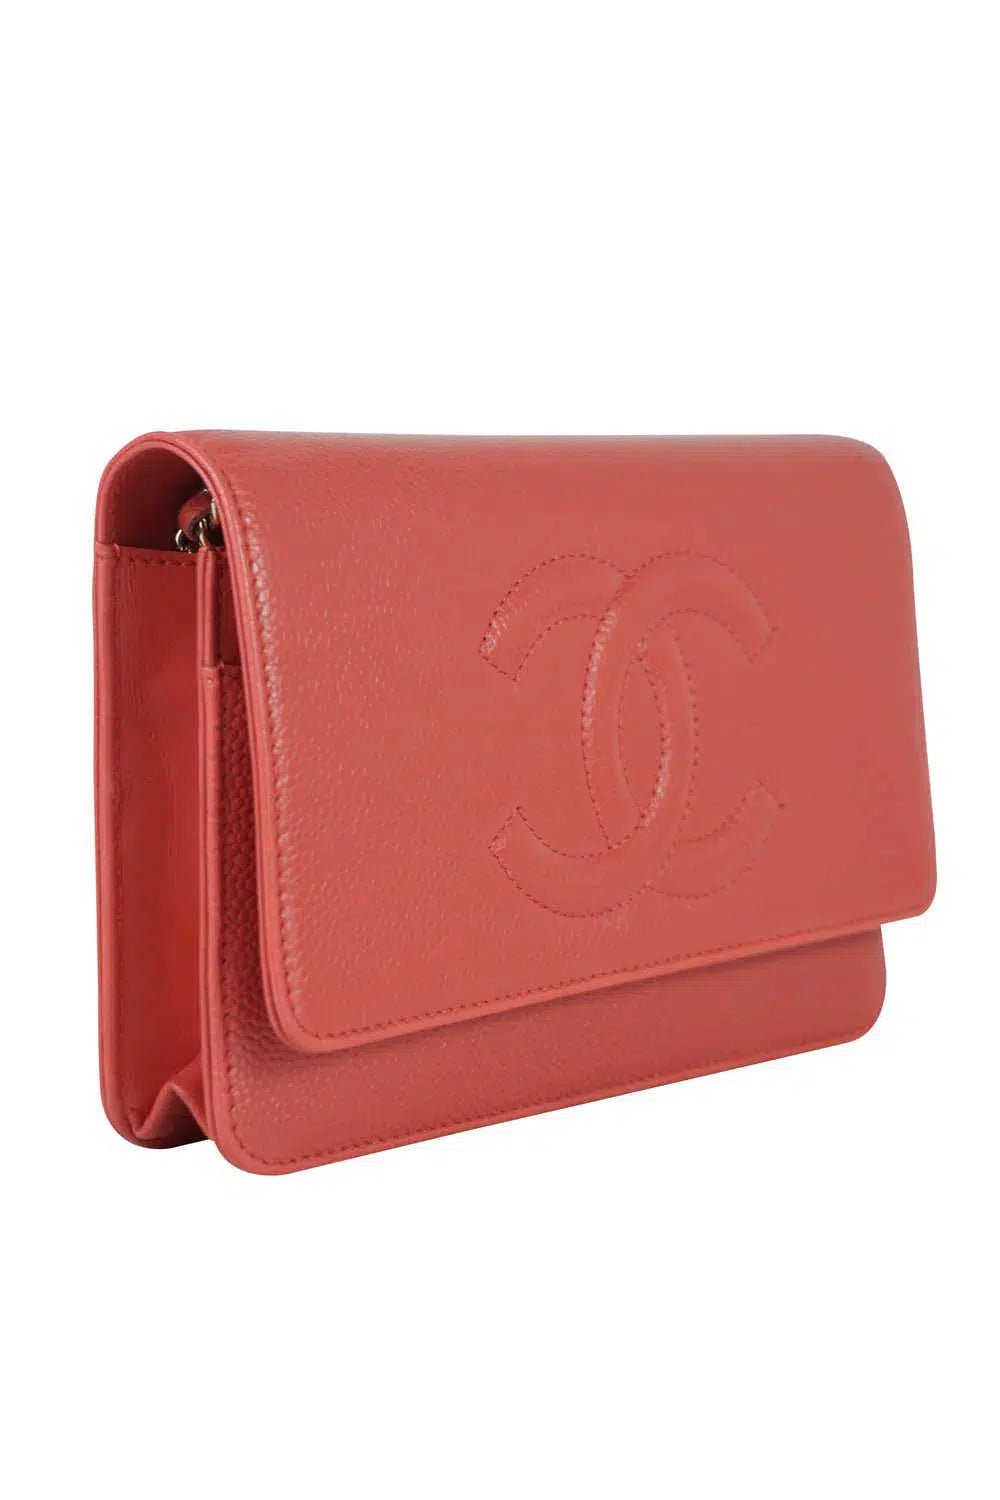 Chanel Caviar Salmon Timeless Wallet on a Chain 2014-15 - Foxy Couture Carmel